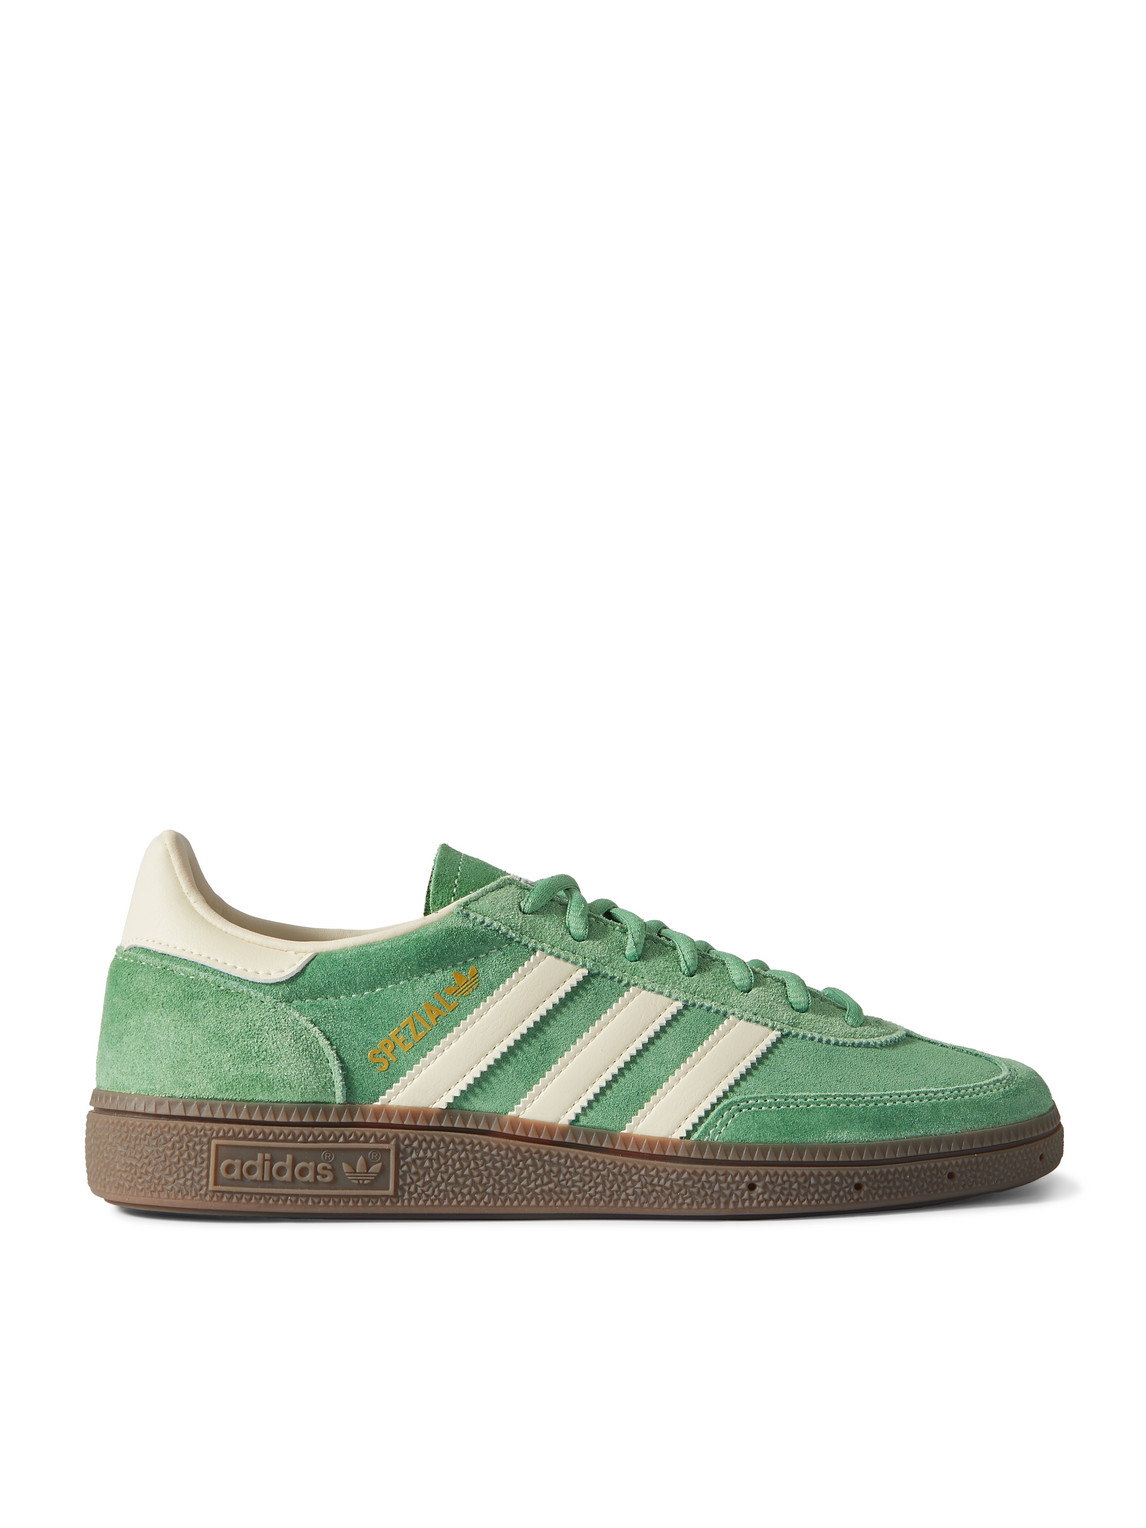 Adidas Originals Handball Spezial Leather-trimmed Suede Sneakers In Green